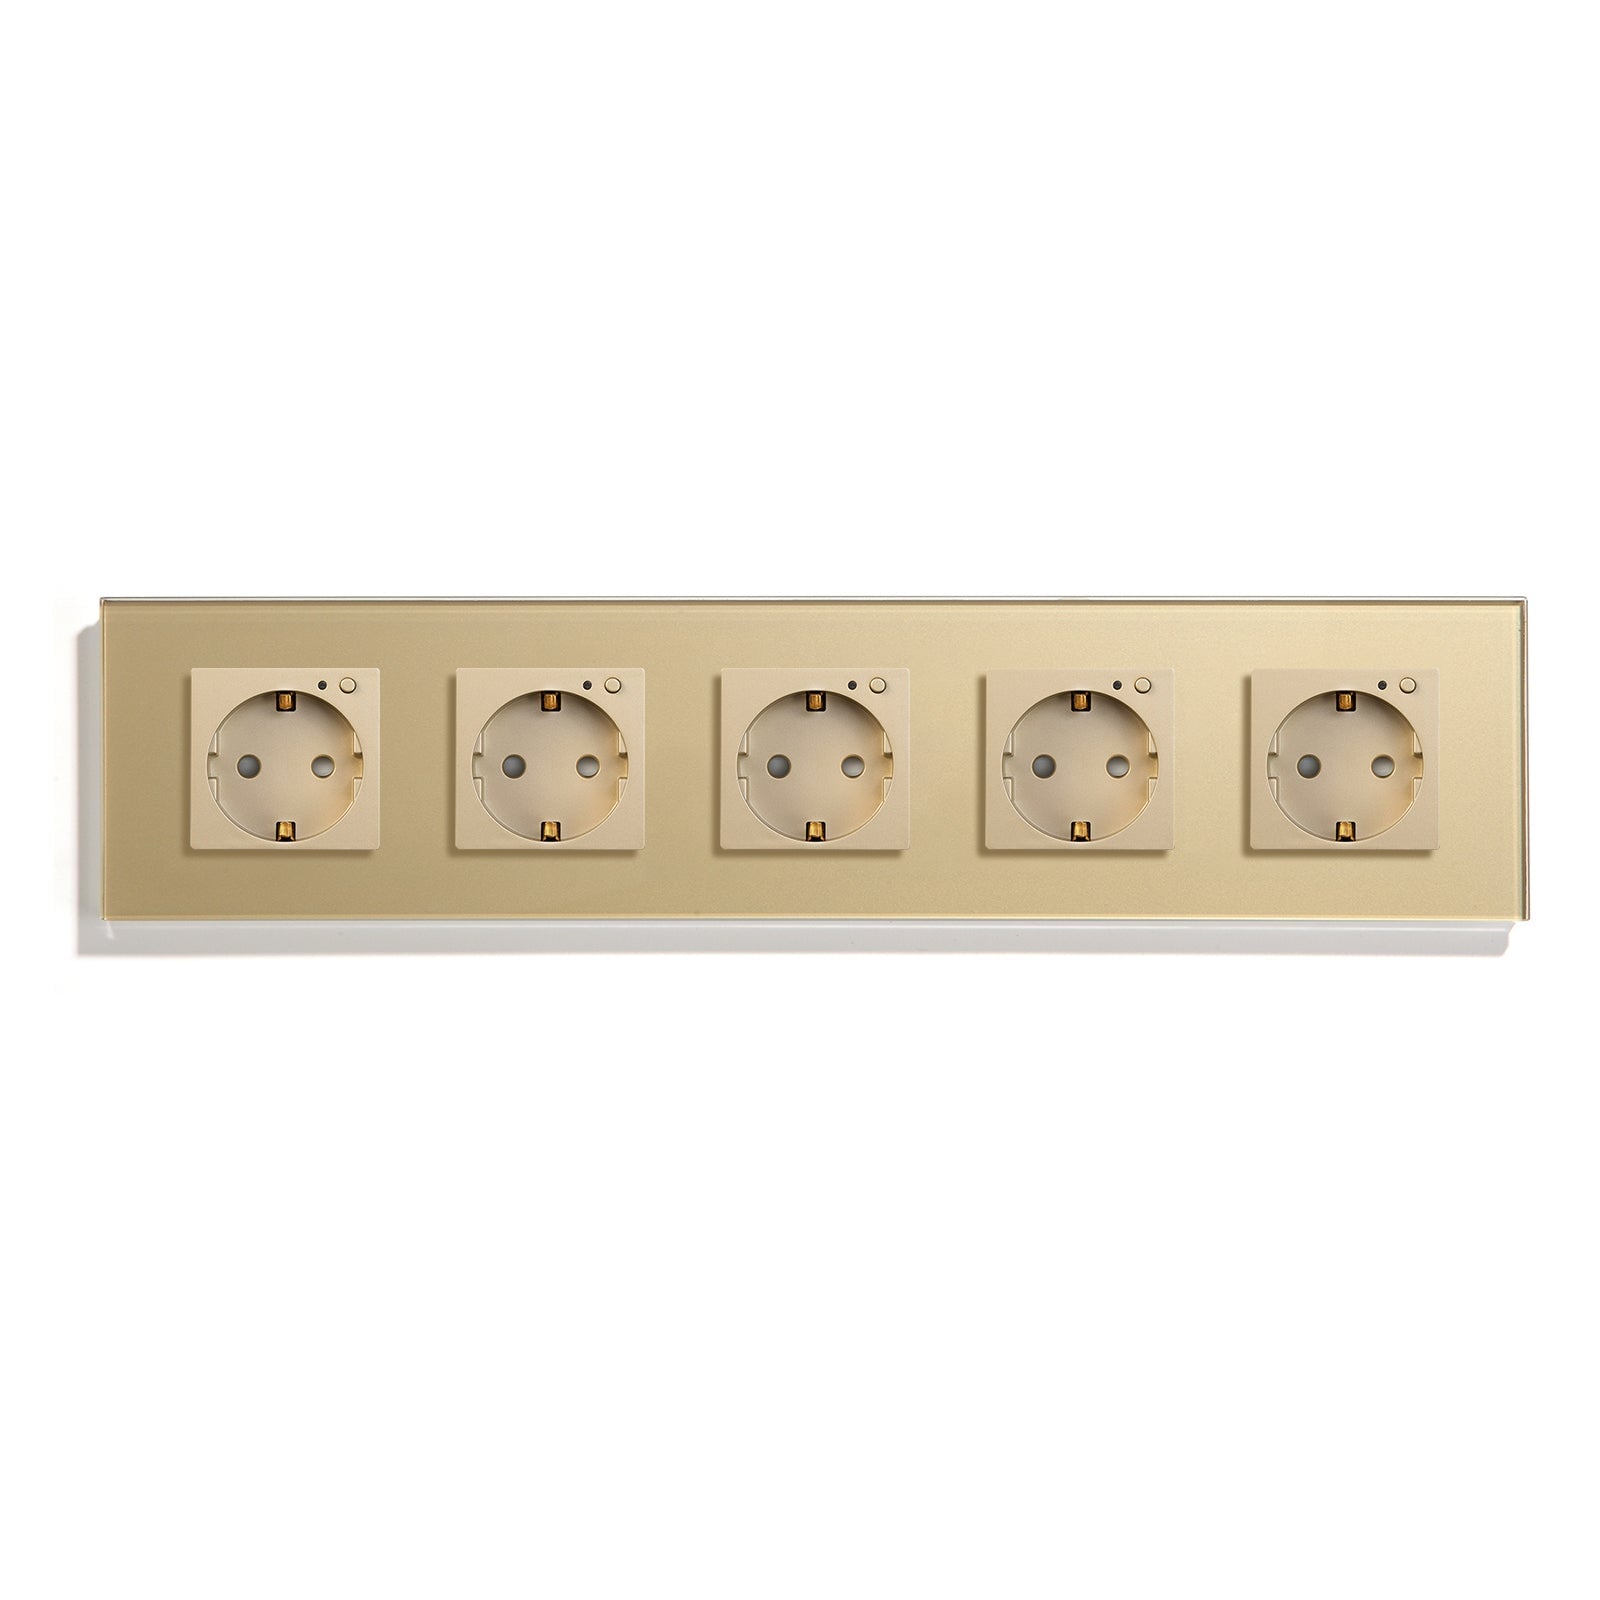 BSEED Wifi EU Wall Sockets Single Power Outlets Kids Protection Wall Plates & Covers Bseedswitch golden Quintuple 